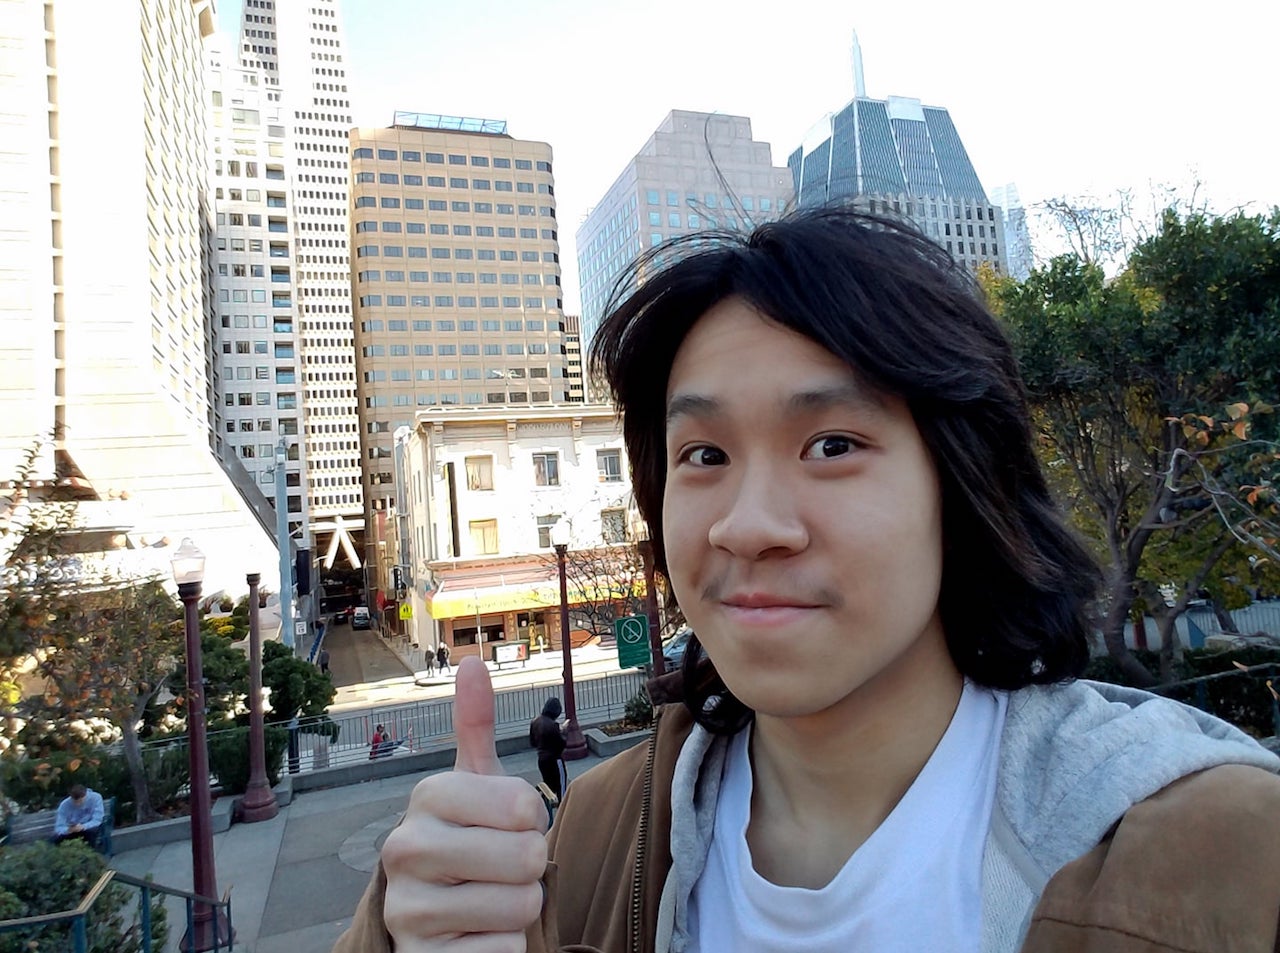 Amos Yee Got Laid. That Doesn’t Mean You Will Too